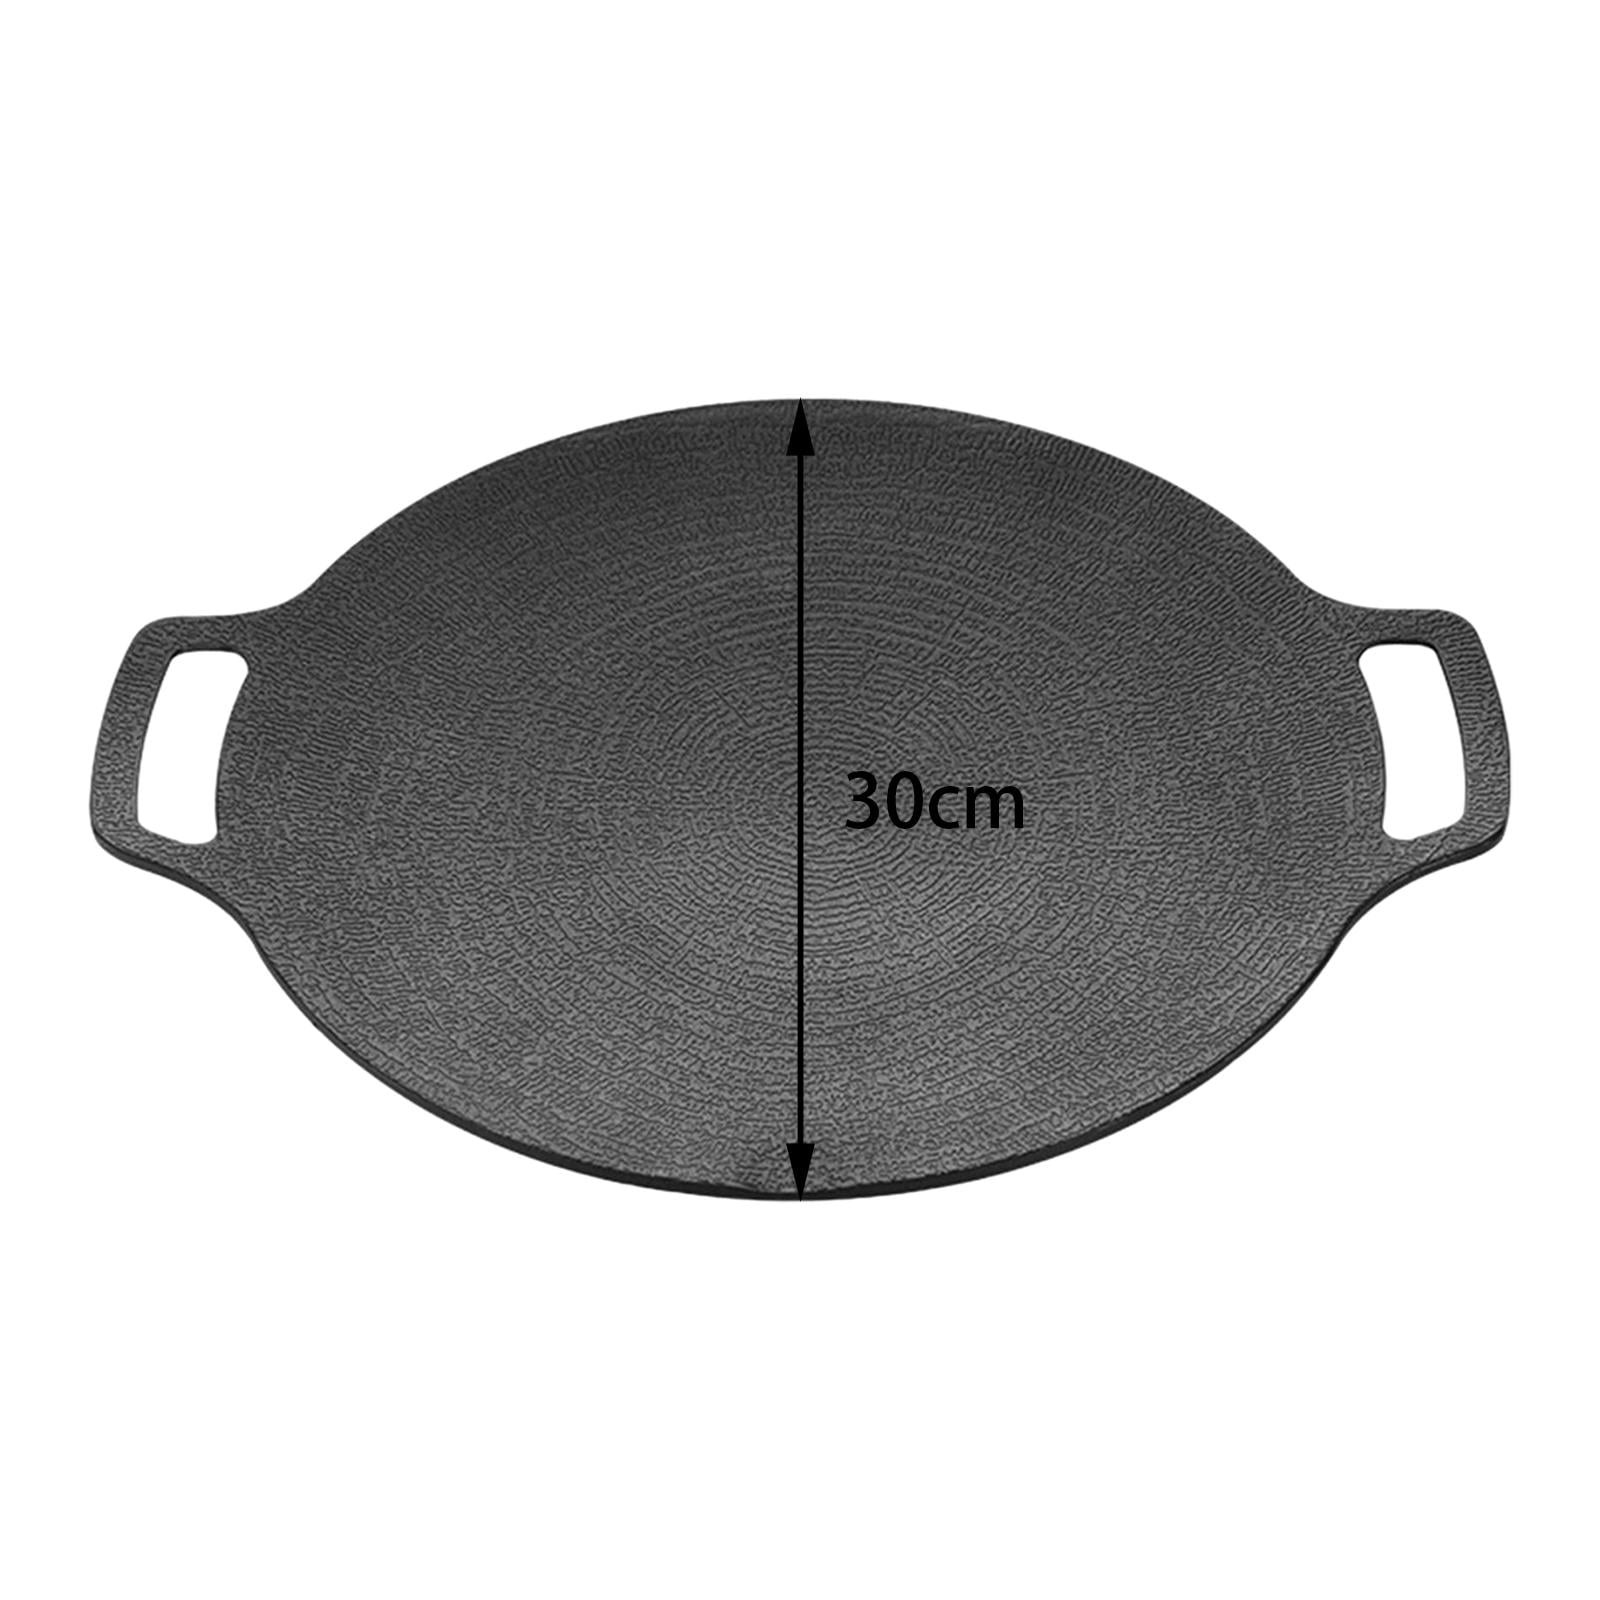 Korean Cast Iron Barbecue Sizzling Plate, Rectangle 구형 무쇠 판 – eKitchenary